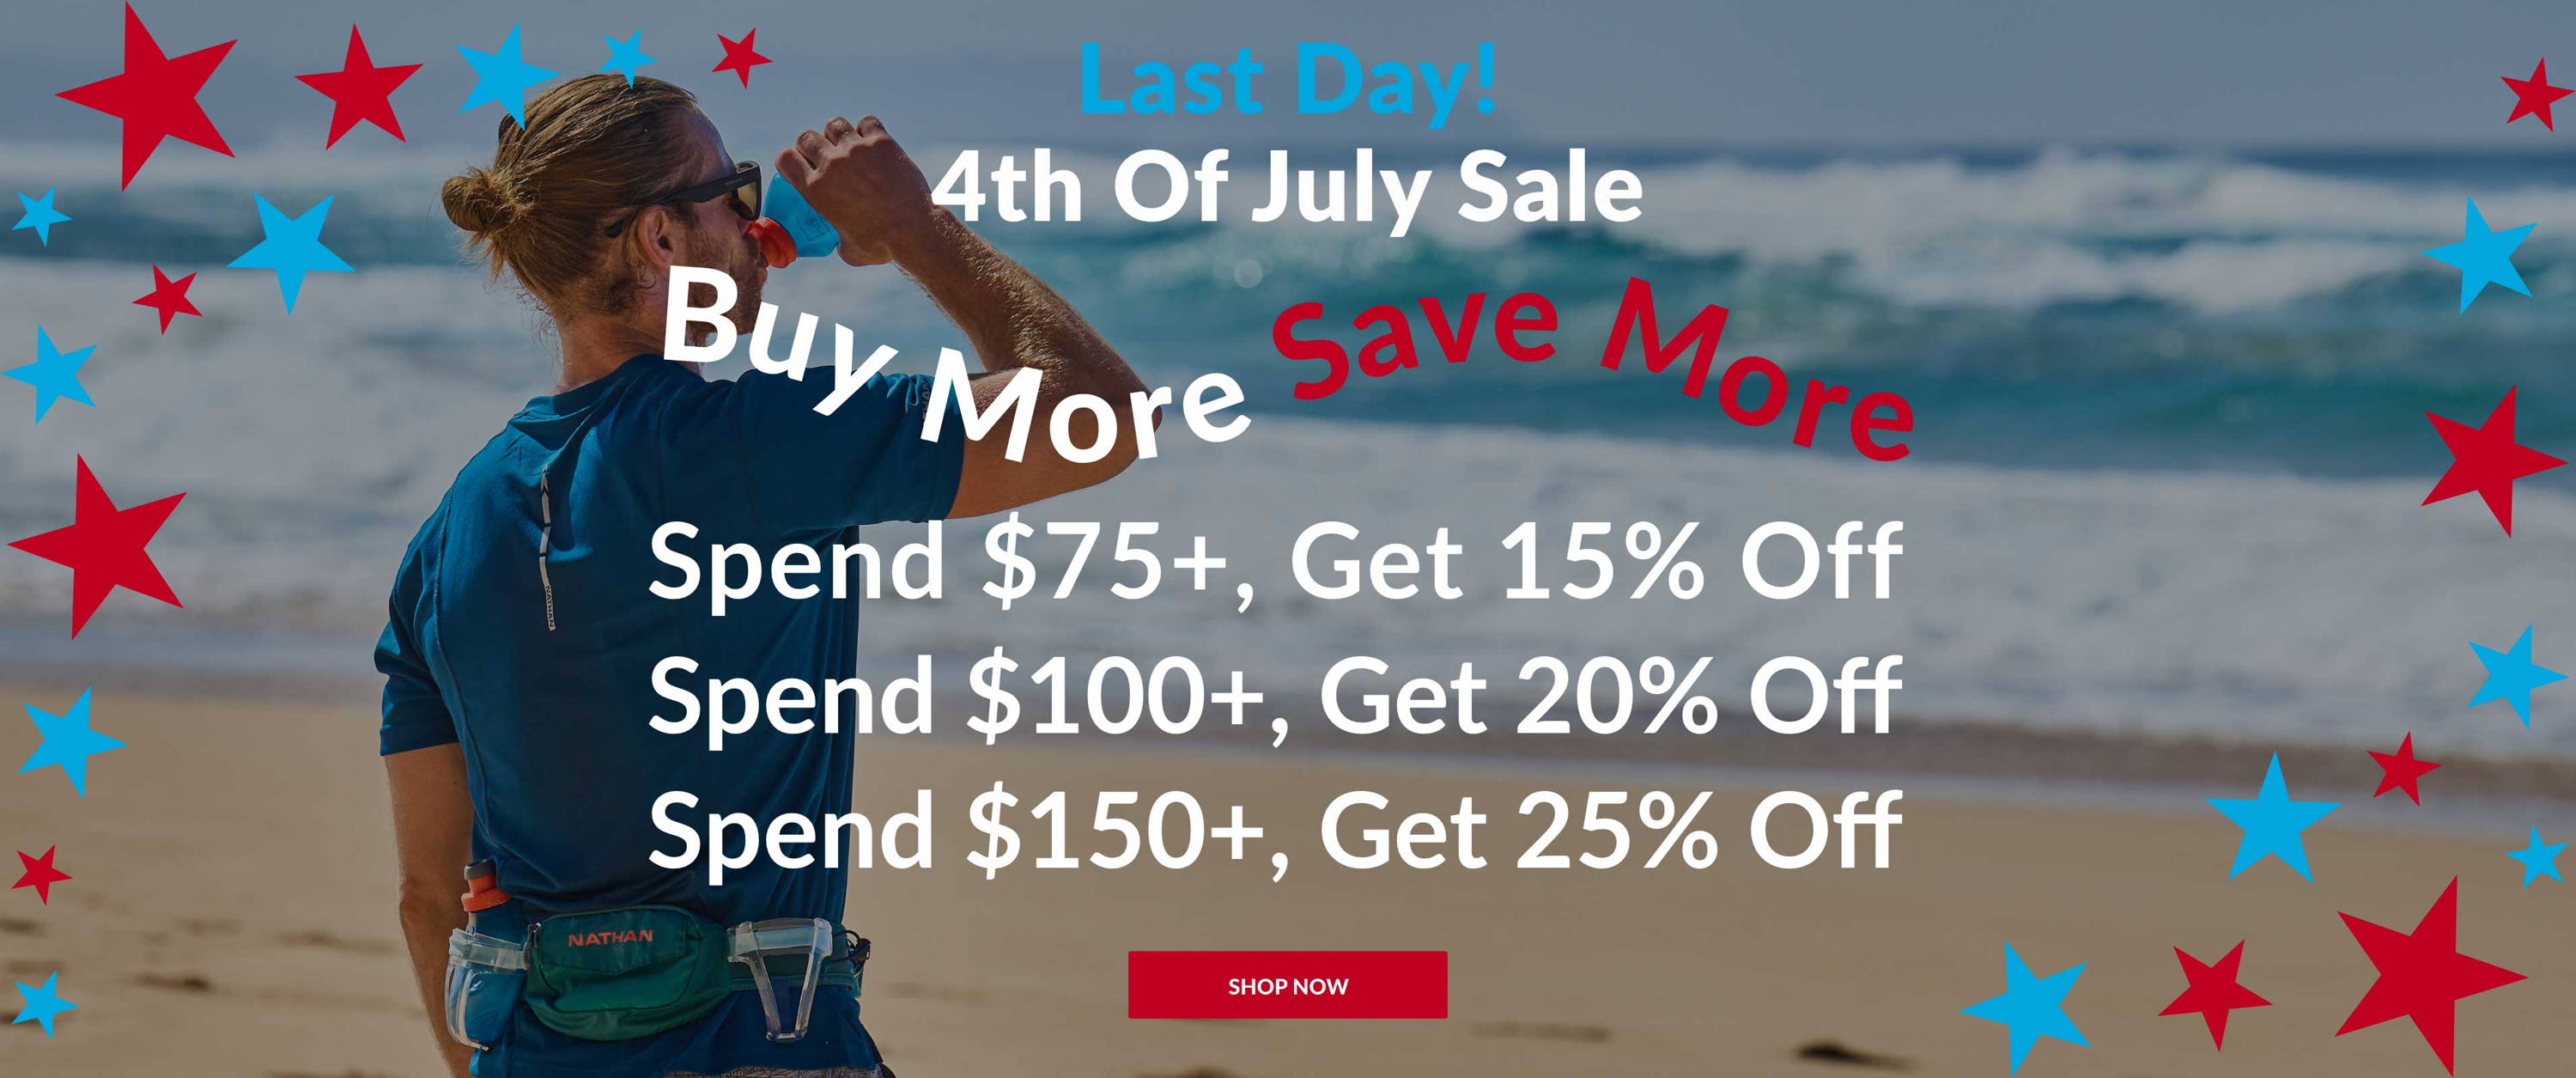 Last Day! 4th of July Sale - Buy More Save More - Spend $75+, Get 15% Off, Spend $100+, Get 20% Off, Spend $150+, Get 25% Off - Shop Now